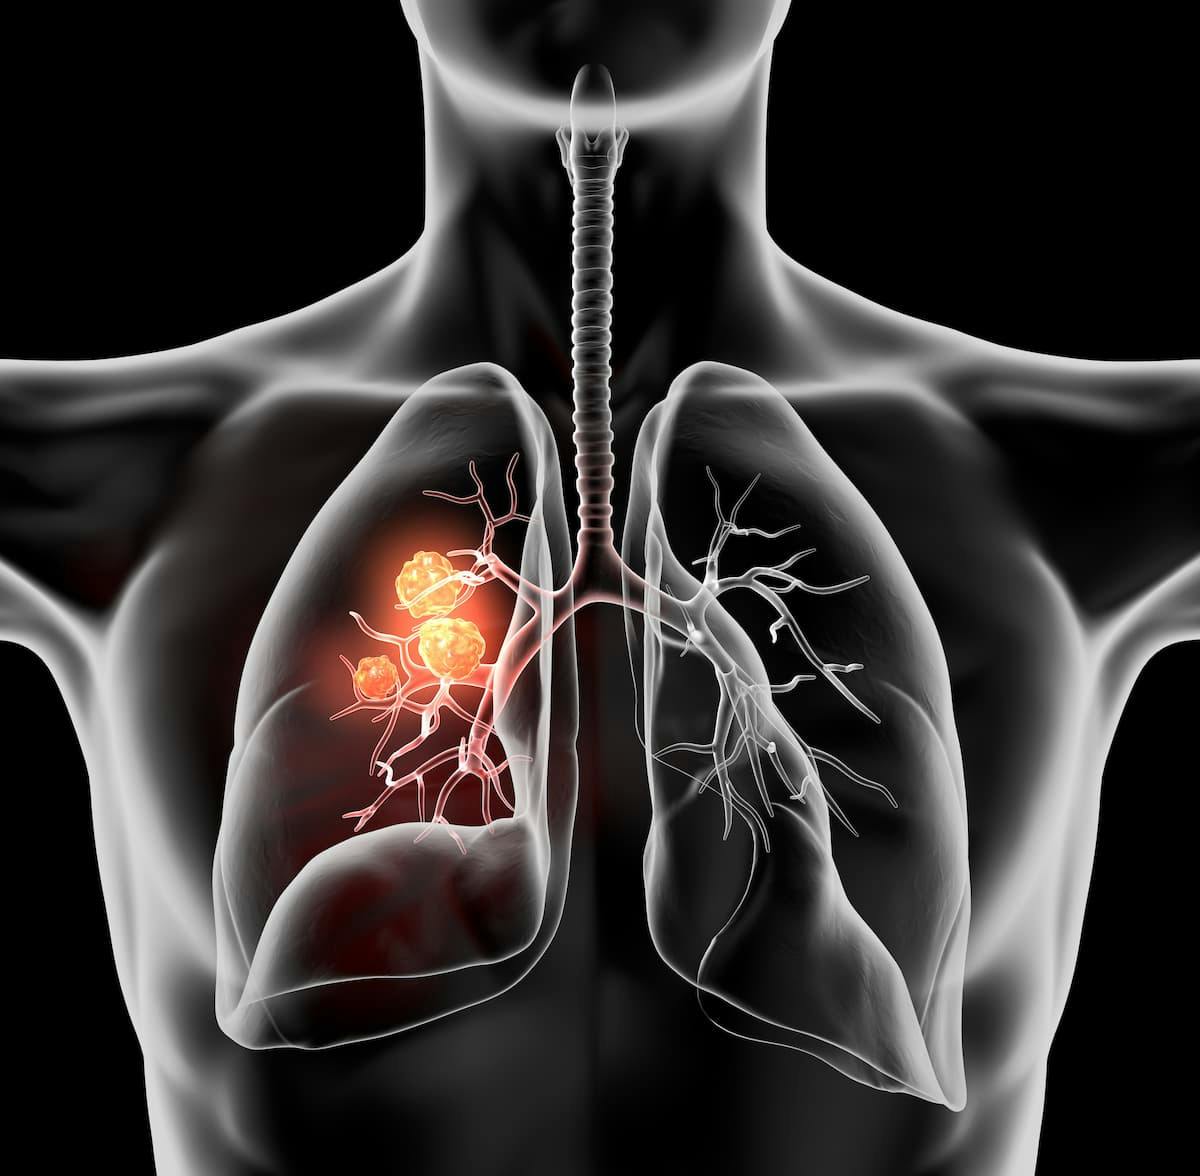 Investigators indicate that more analyses are necessary to identify patients with pretreated small cell lung cancer who will best benefit from treatment with olaparib and durvalumab.